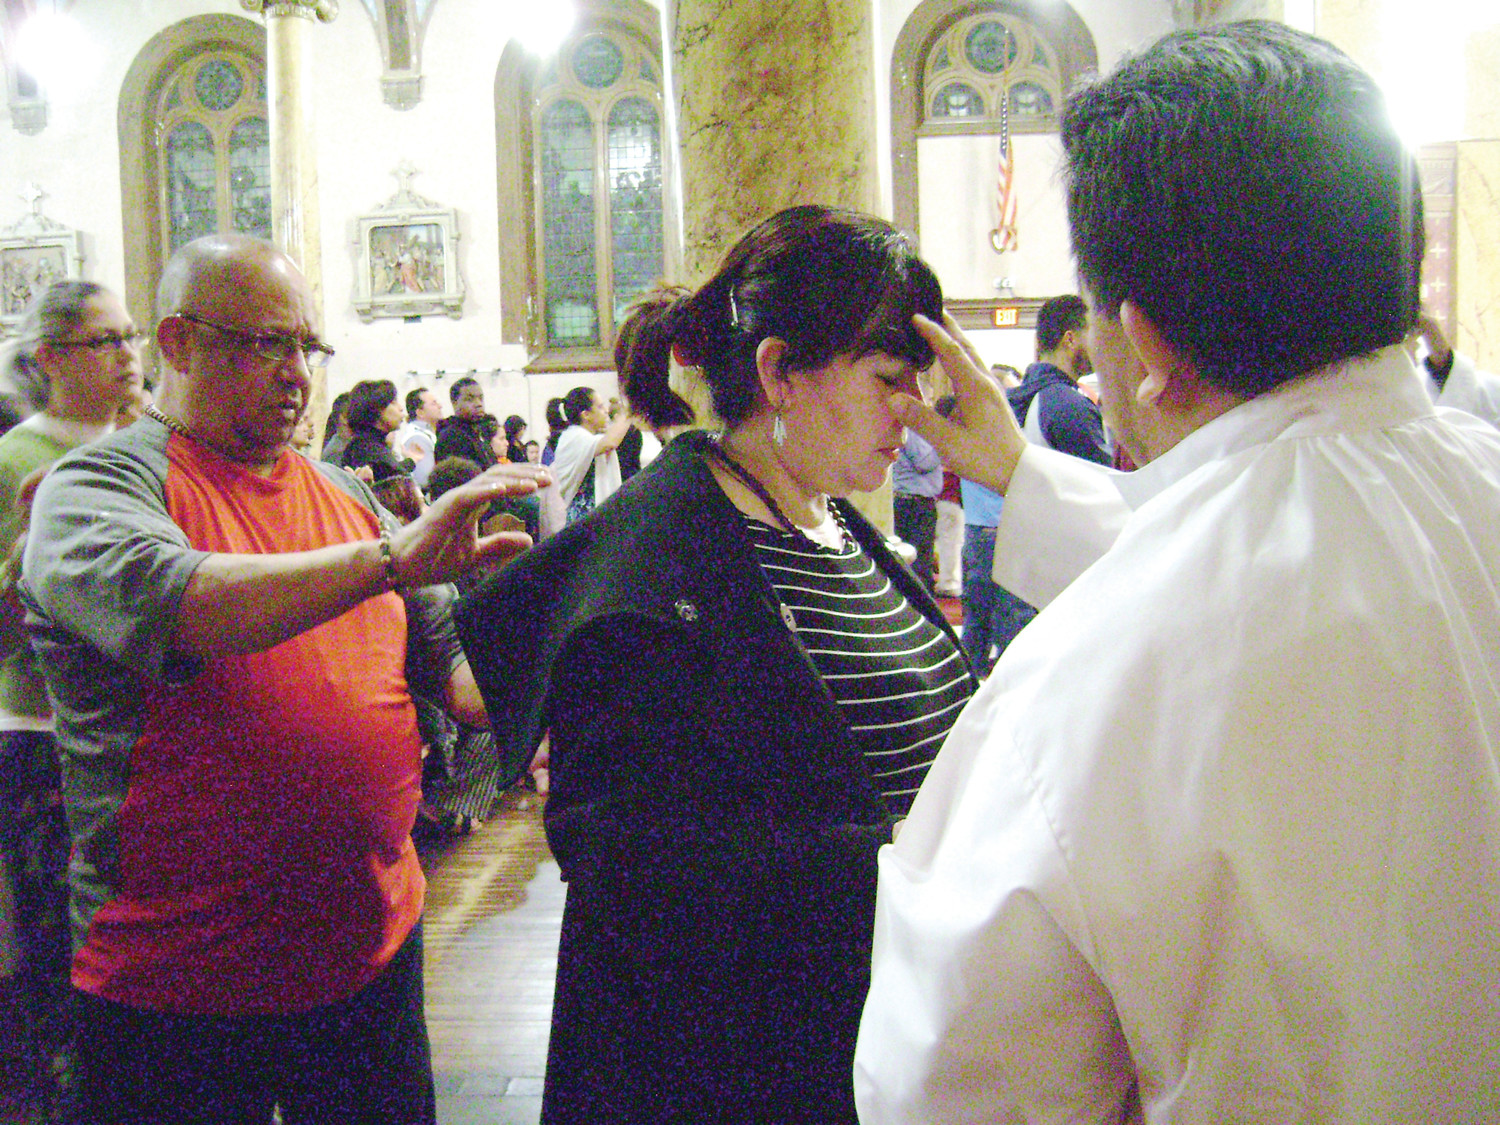 Miguel Soto, right, prays over a person for healing while Mario Orellana stands ready to catch the person if she “rests in the Spirit” at St. Charles Church’s Spanish-language healing Mass on Tuesday, April 24.